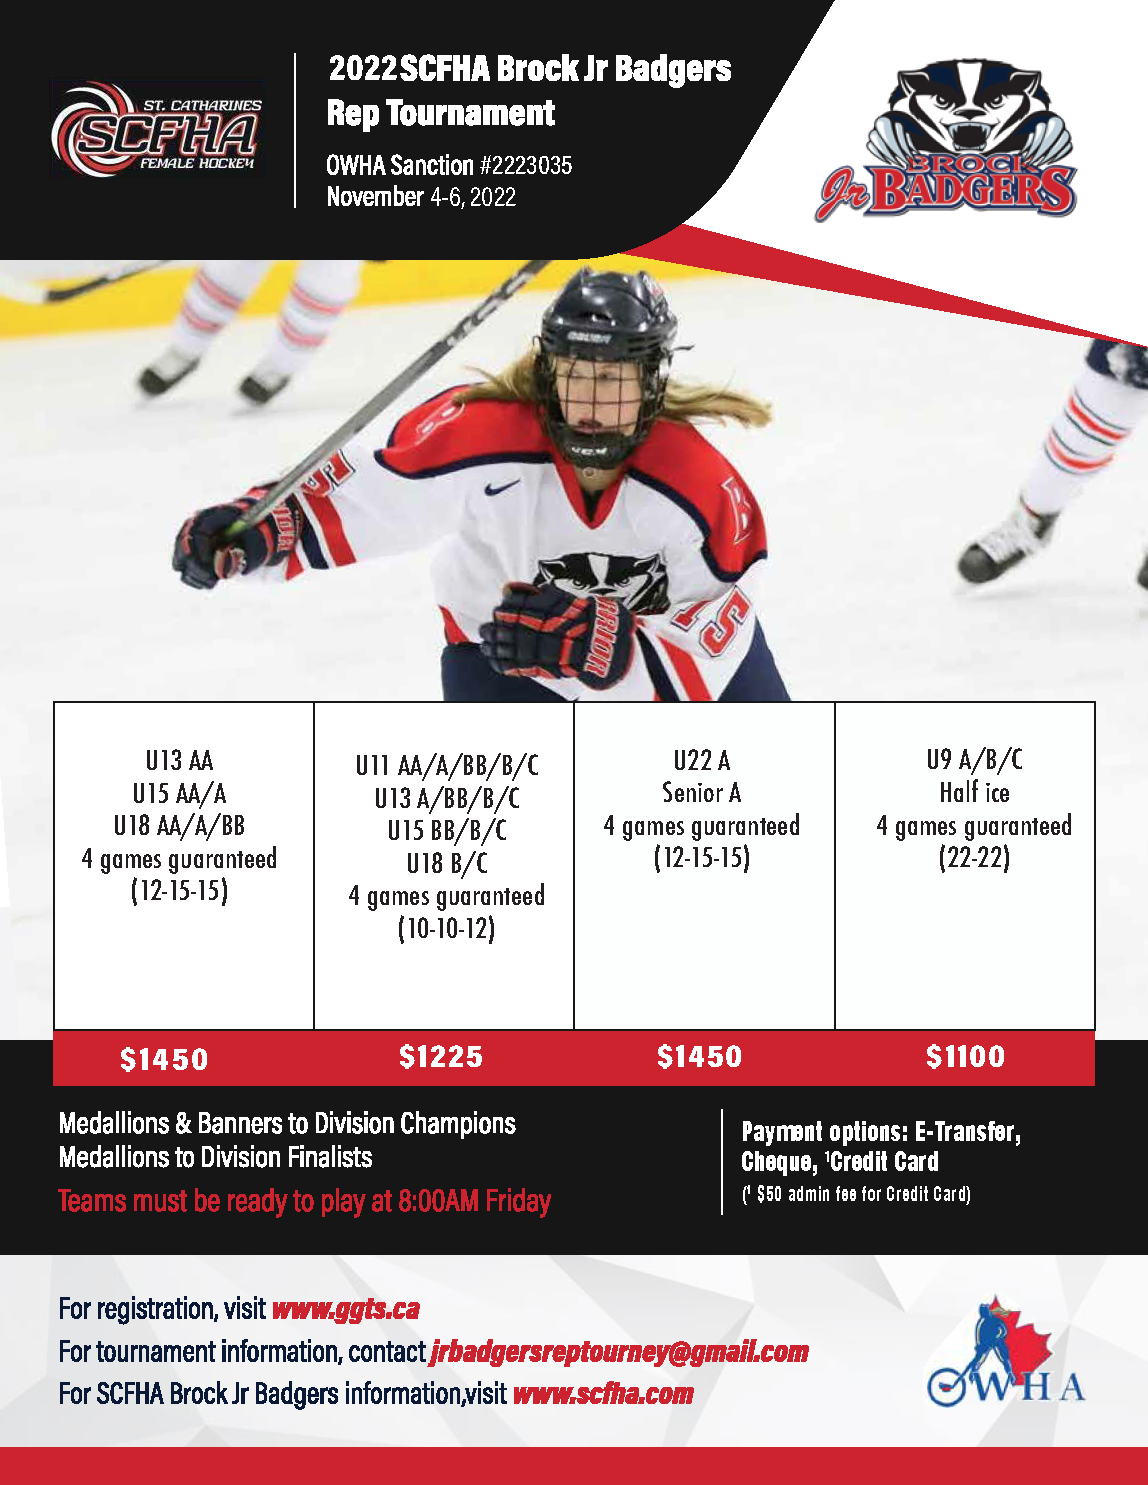 SCFHA-Rep-Tournament-Flyer-2022-with-Sanction-Number.png